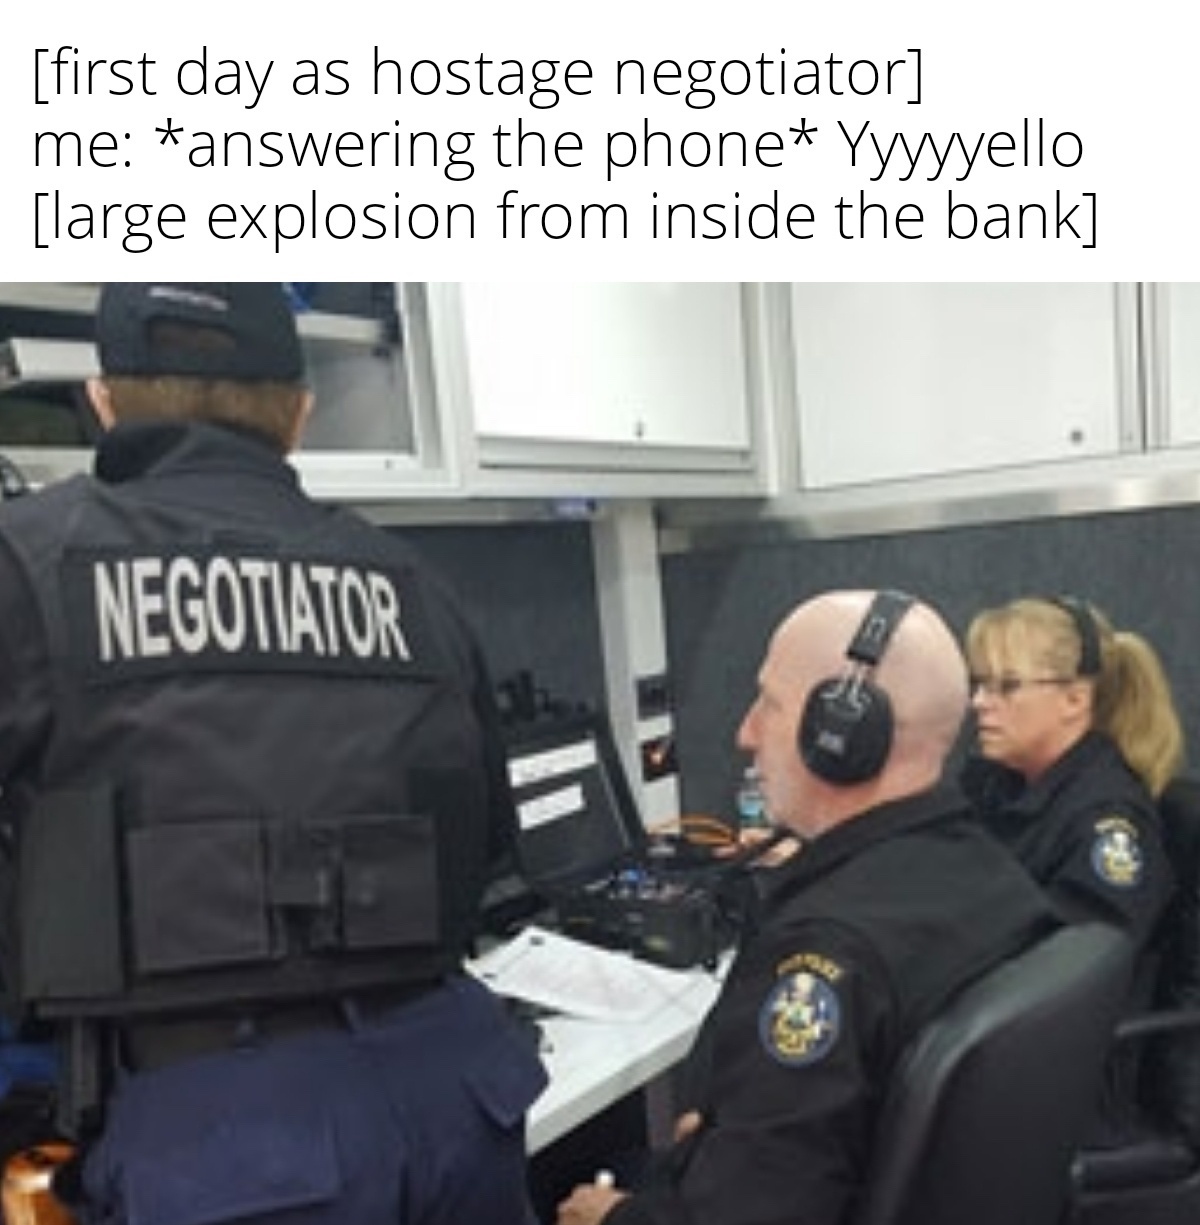 funny memes - hostage negotiator job - first day as hostage negotiator me answering the phone Yyyyyello large explosion from inside the bank Negotiator